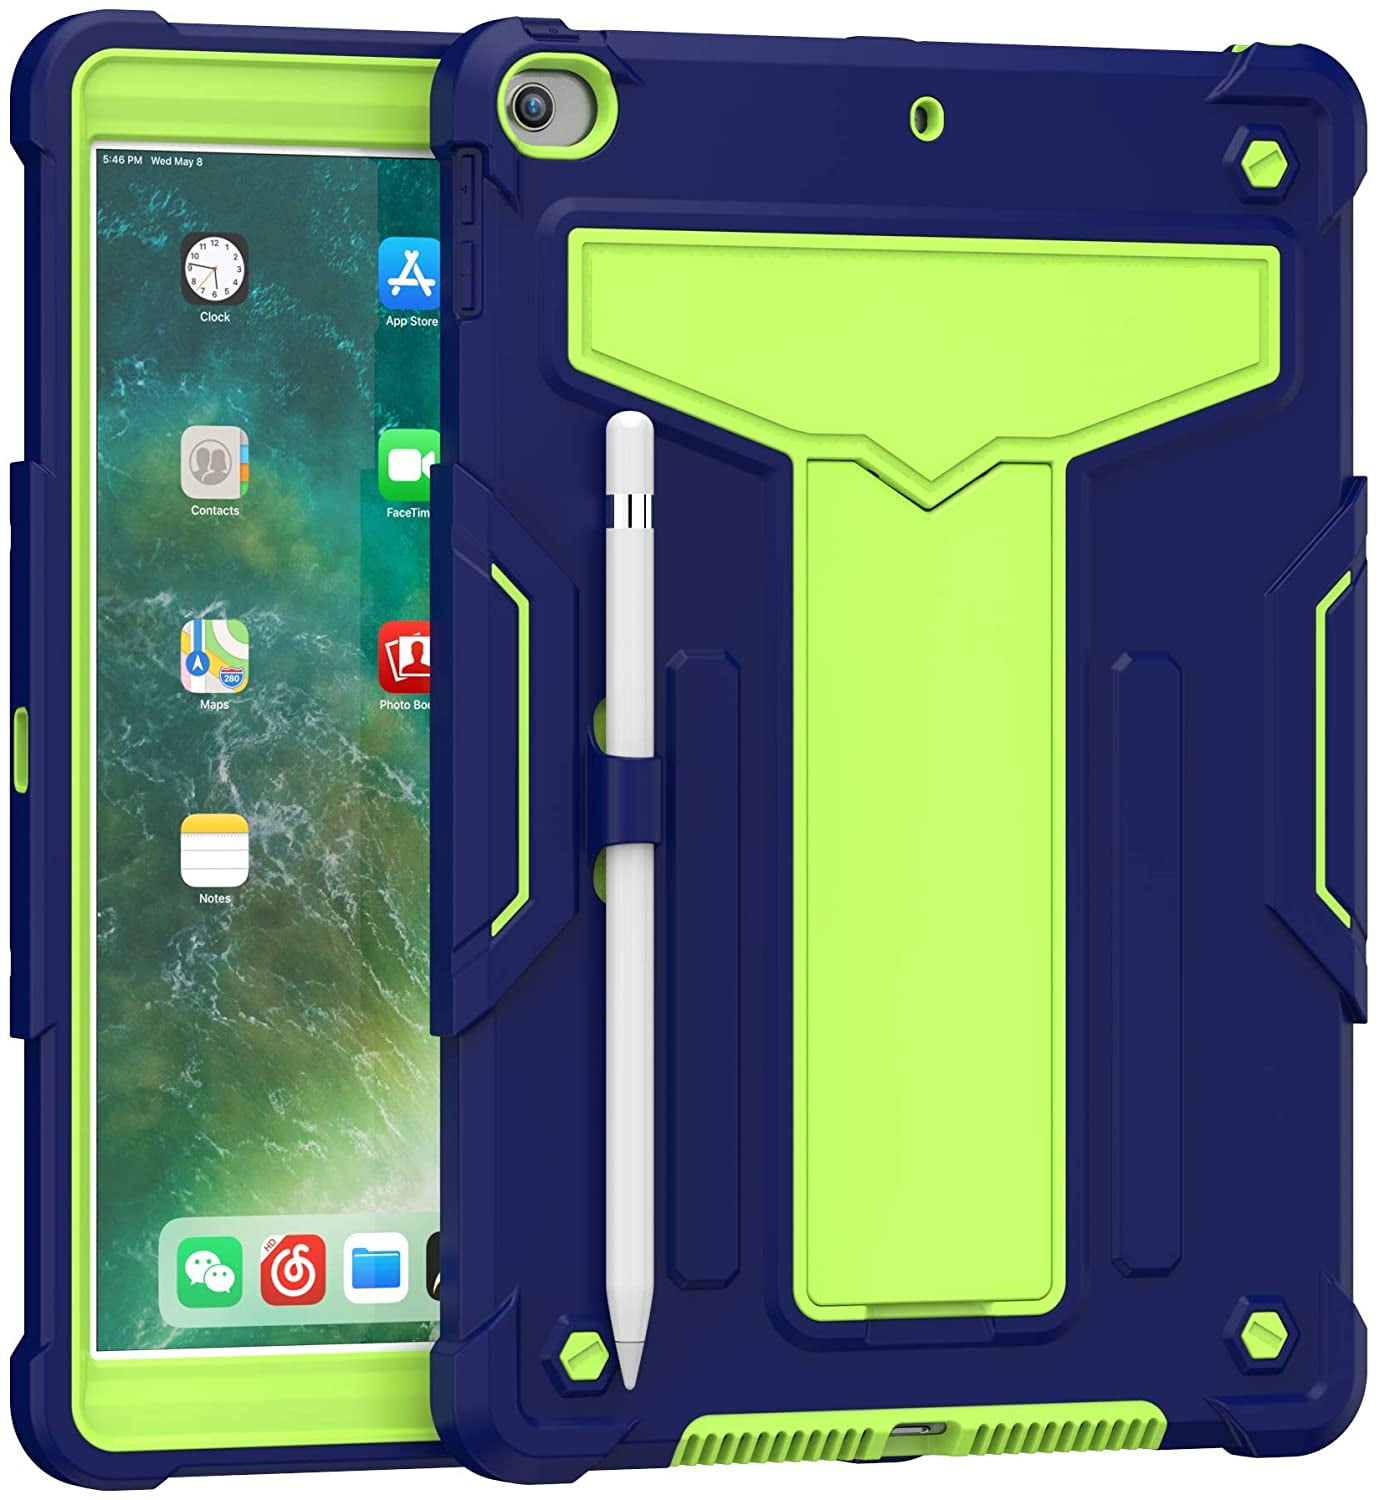 EpicGadget Case for iPad 10.2 (9th/8th/7th Gen) Protective Rugged Hybrid Case Kickstand Pencil Holder Cover for Apple 10.2 Inch iPad 9th/8th/7th Generation 2021/2020/2019 Release (Navy Blue/Green)